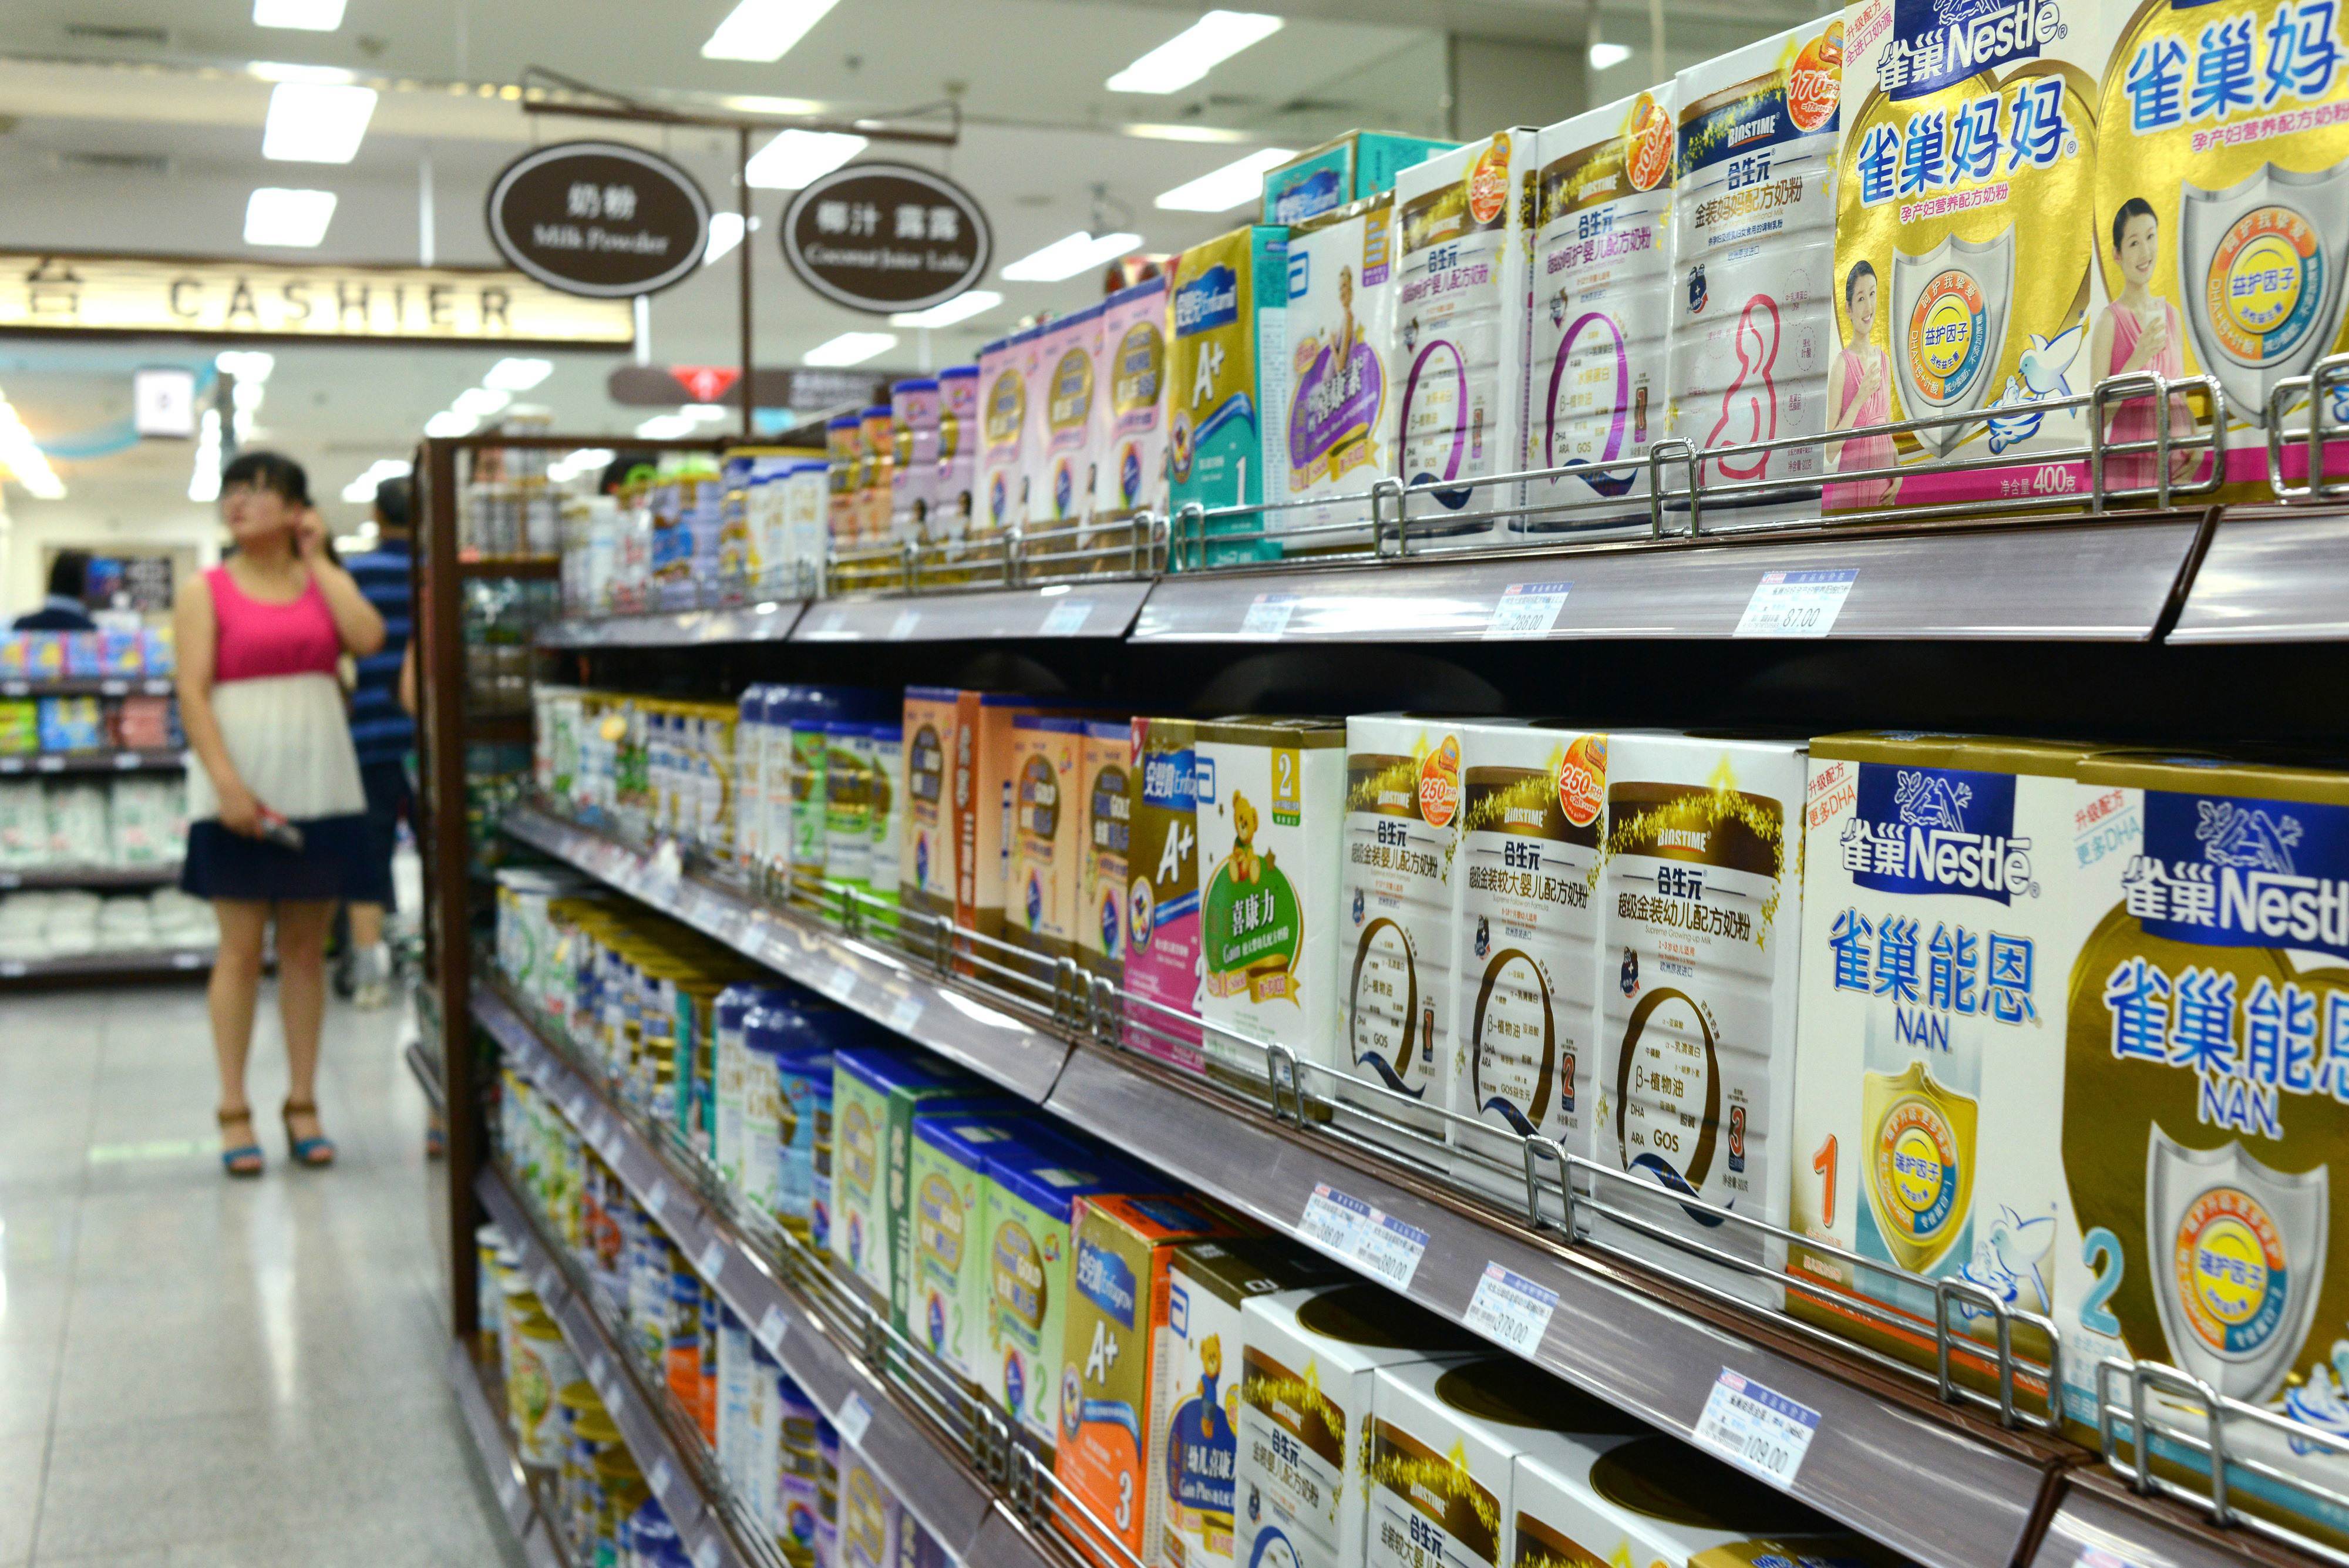 Food scandals in China have led consumers to seek out foreign brands, particularly for baby formula. Photo: AFP